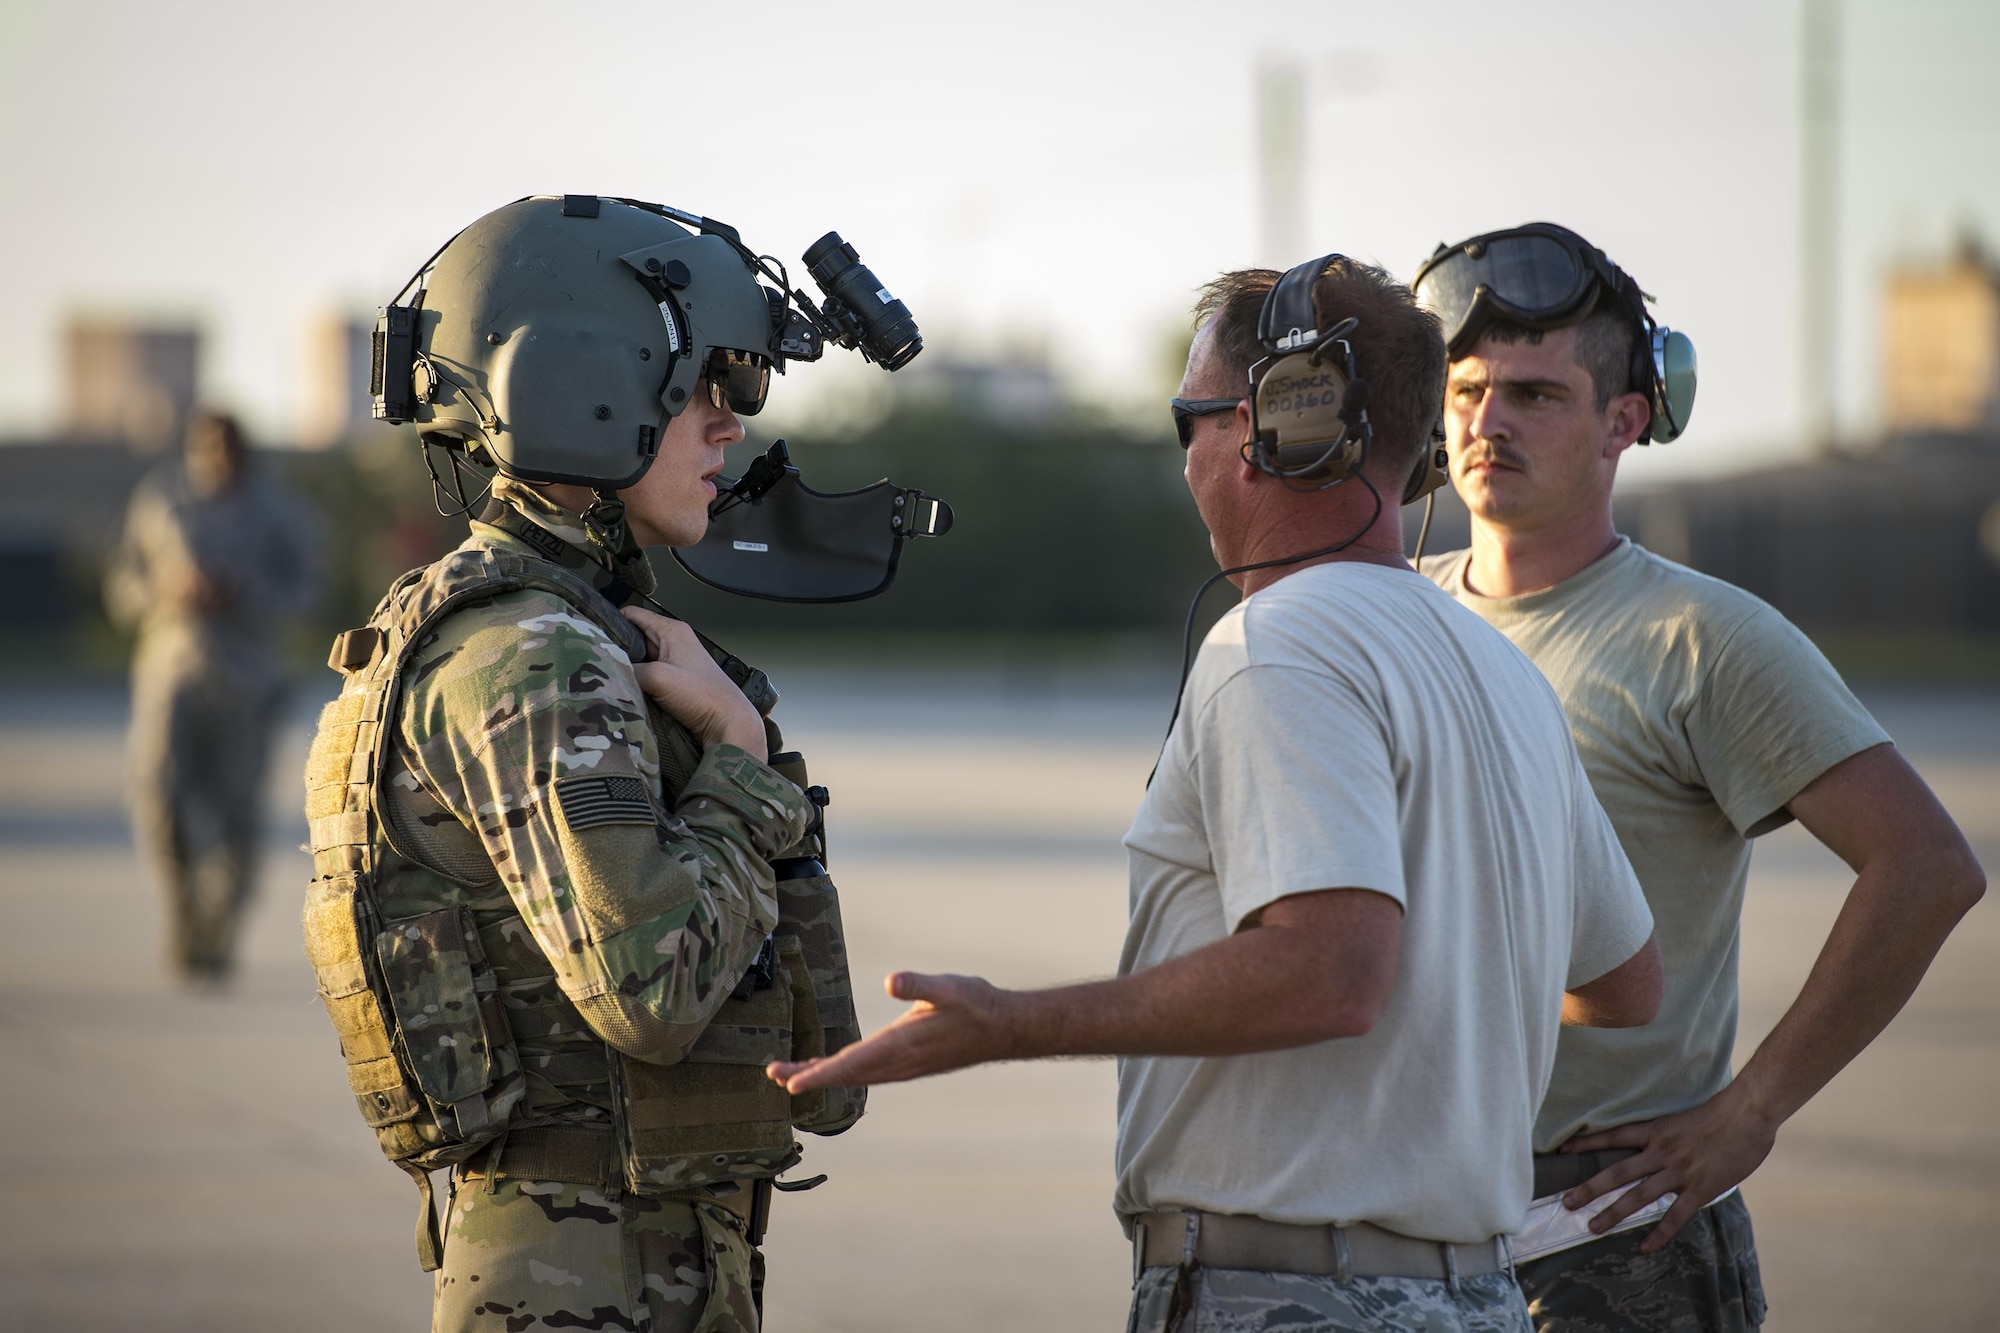 An aircrew member from the 41st Rescue Squadron discusses the maintenance status of an HH-60G Pave Hawk with airmen from the 41st Helicopter Maintenance Unit after a mission, Dec. 12, 2016, at Patrick Air Force Base, Fla. The 41st HMU worked alongside the 41st Rescue Squadron for ten days as they conducted pre-deployment “spin-up” training. The maintainers were responsible for ensuring three aircraft were combat-ready at a moment’s notice and worked around the clock to meet this requirement for both day and night missions. (U.S. Air Force photo by Staff Sgt. Ryan Callaghan)